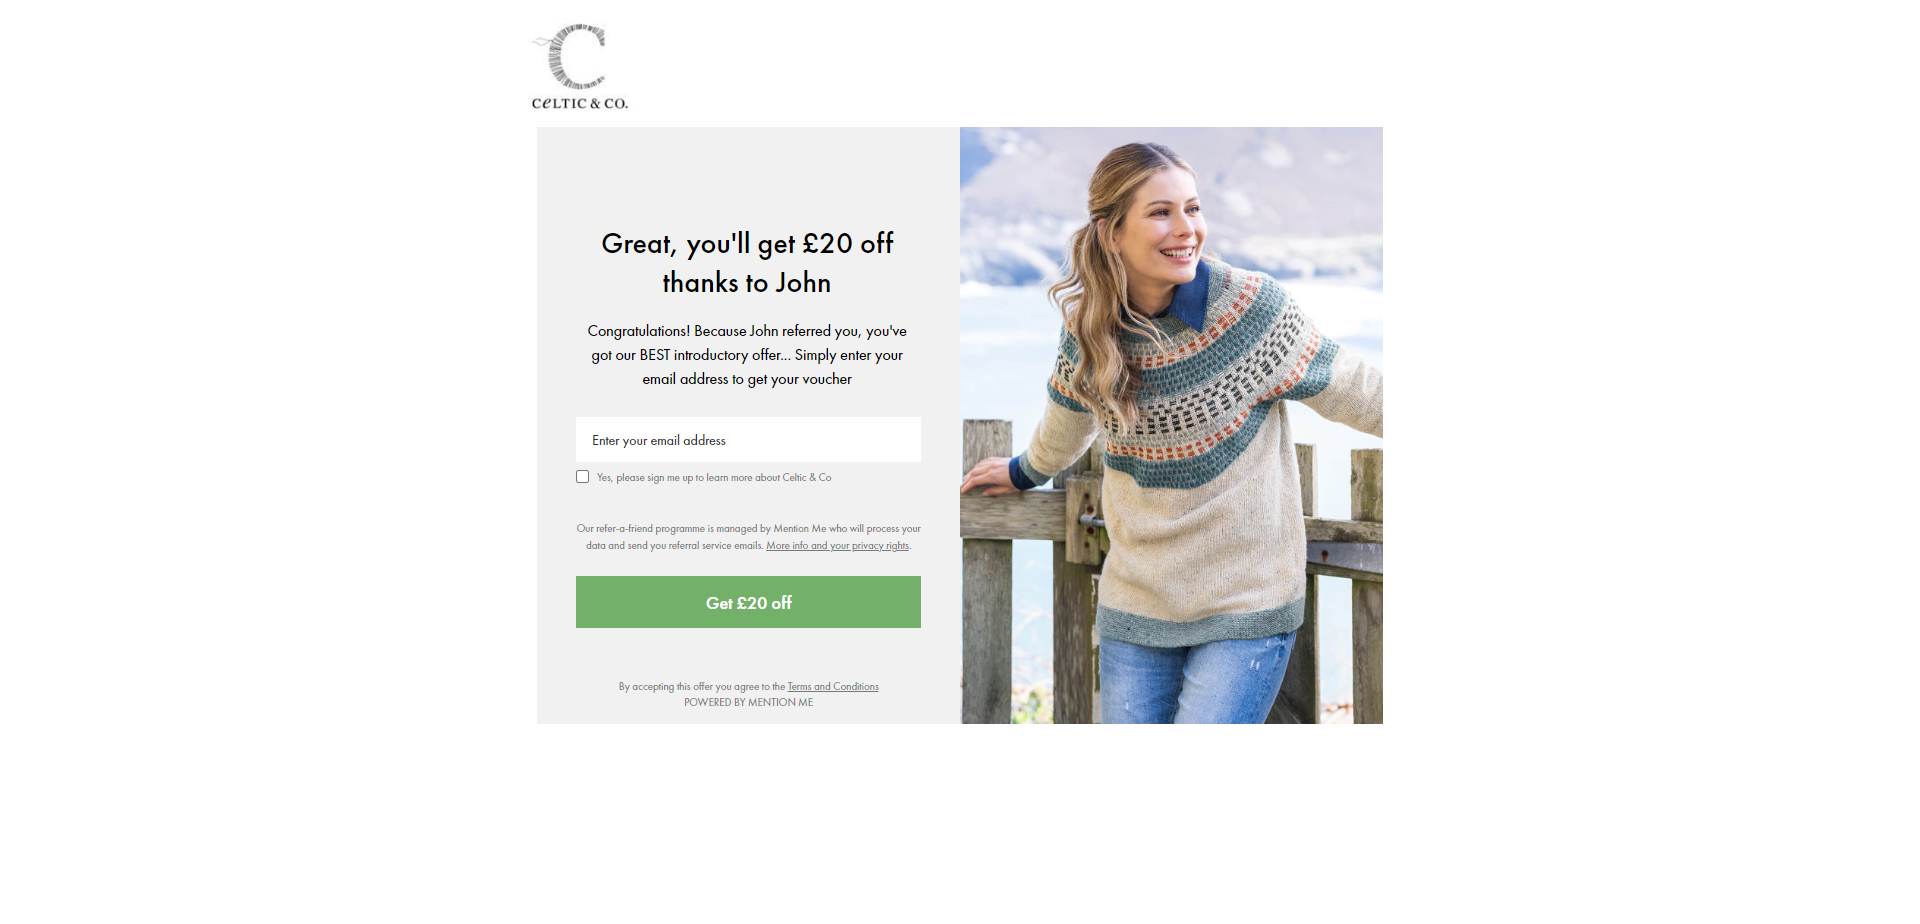 Referral Landing Page for Celtic and Co